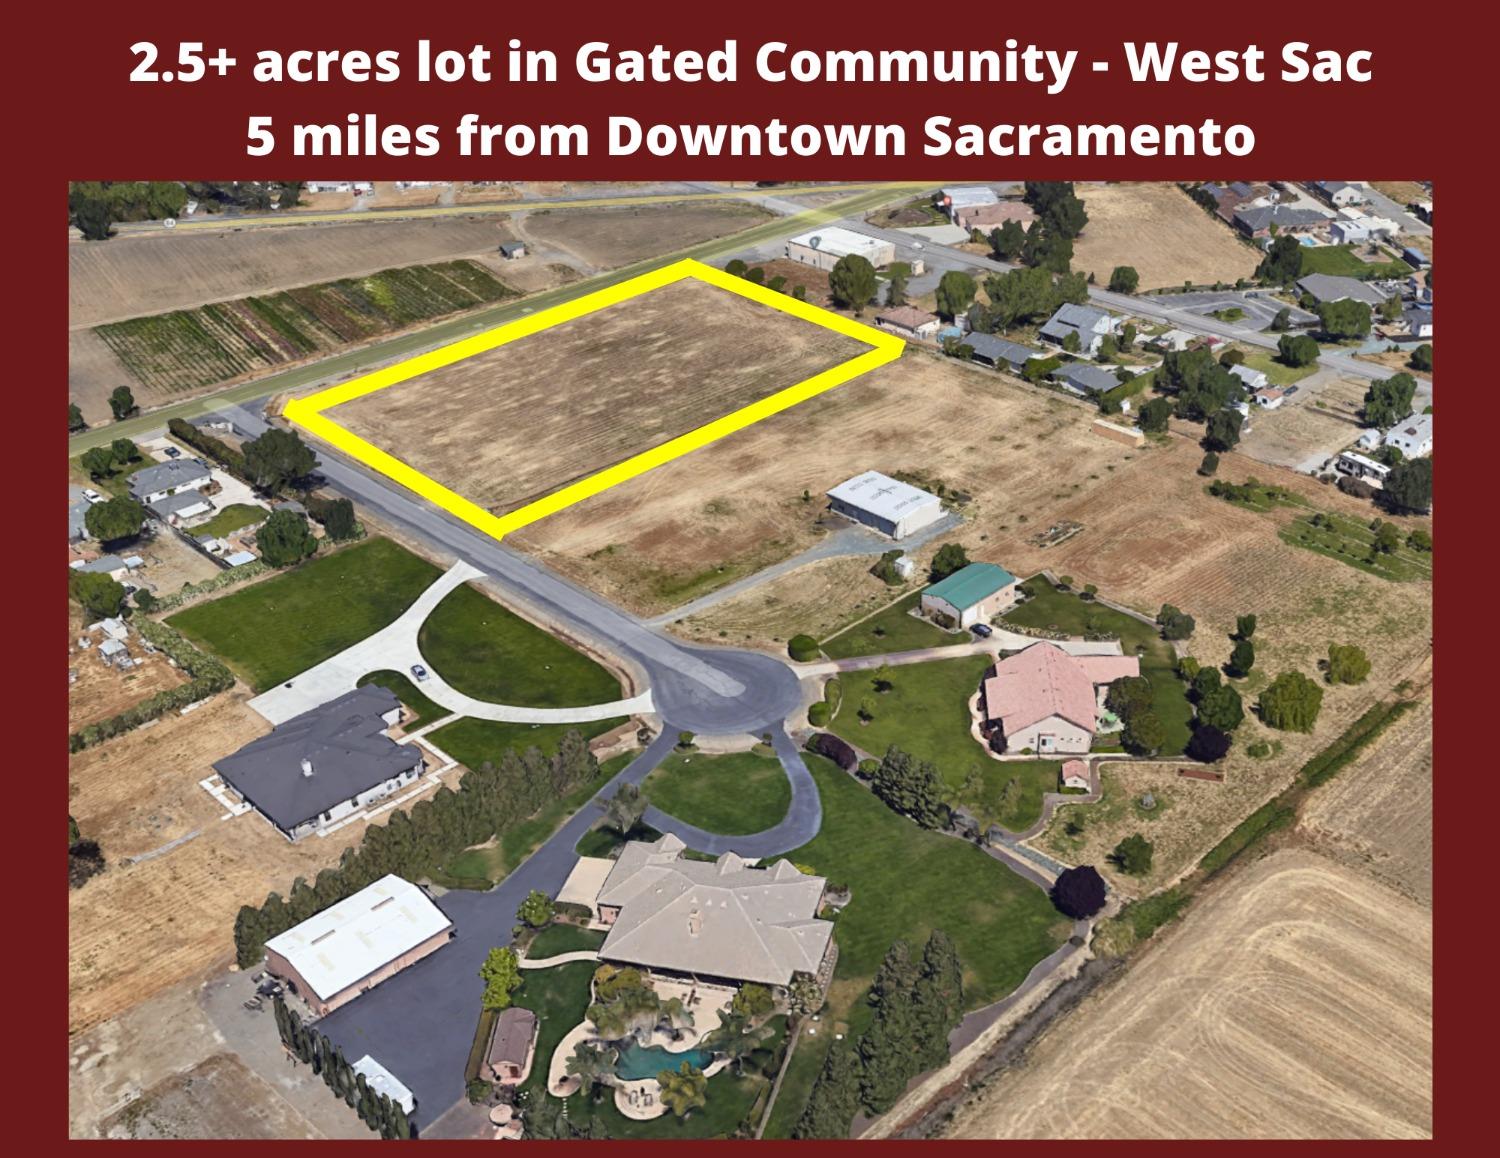 VERY UNIQUE  PARCEL OF LAND IN A  GATED COMMUNITY IN WEST SAC! This 2.5 AC property is ready for your dream home to be built on! Electricity is at the site!  This great corner lot home has lots of potential and is flat and usable! The property can be accessed on Miller Ct or Gregory Ave, perfect for adding additional access to the parcel from different entrances! Add an ADU? Lot of space for this but Buyer to verify!  This property is close to downtown, shopping and freeway! Come see this unique 2.5 AC parcel and come built your dream home on this land today! LAND LOAN AVALAIBLE!